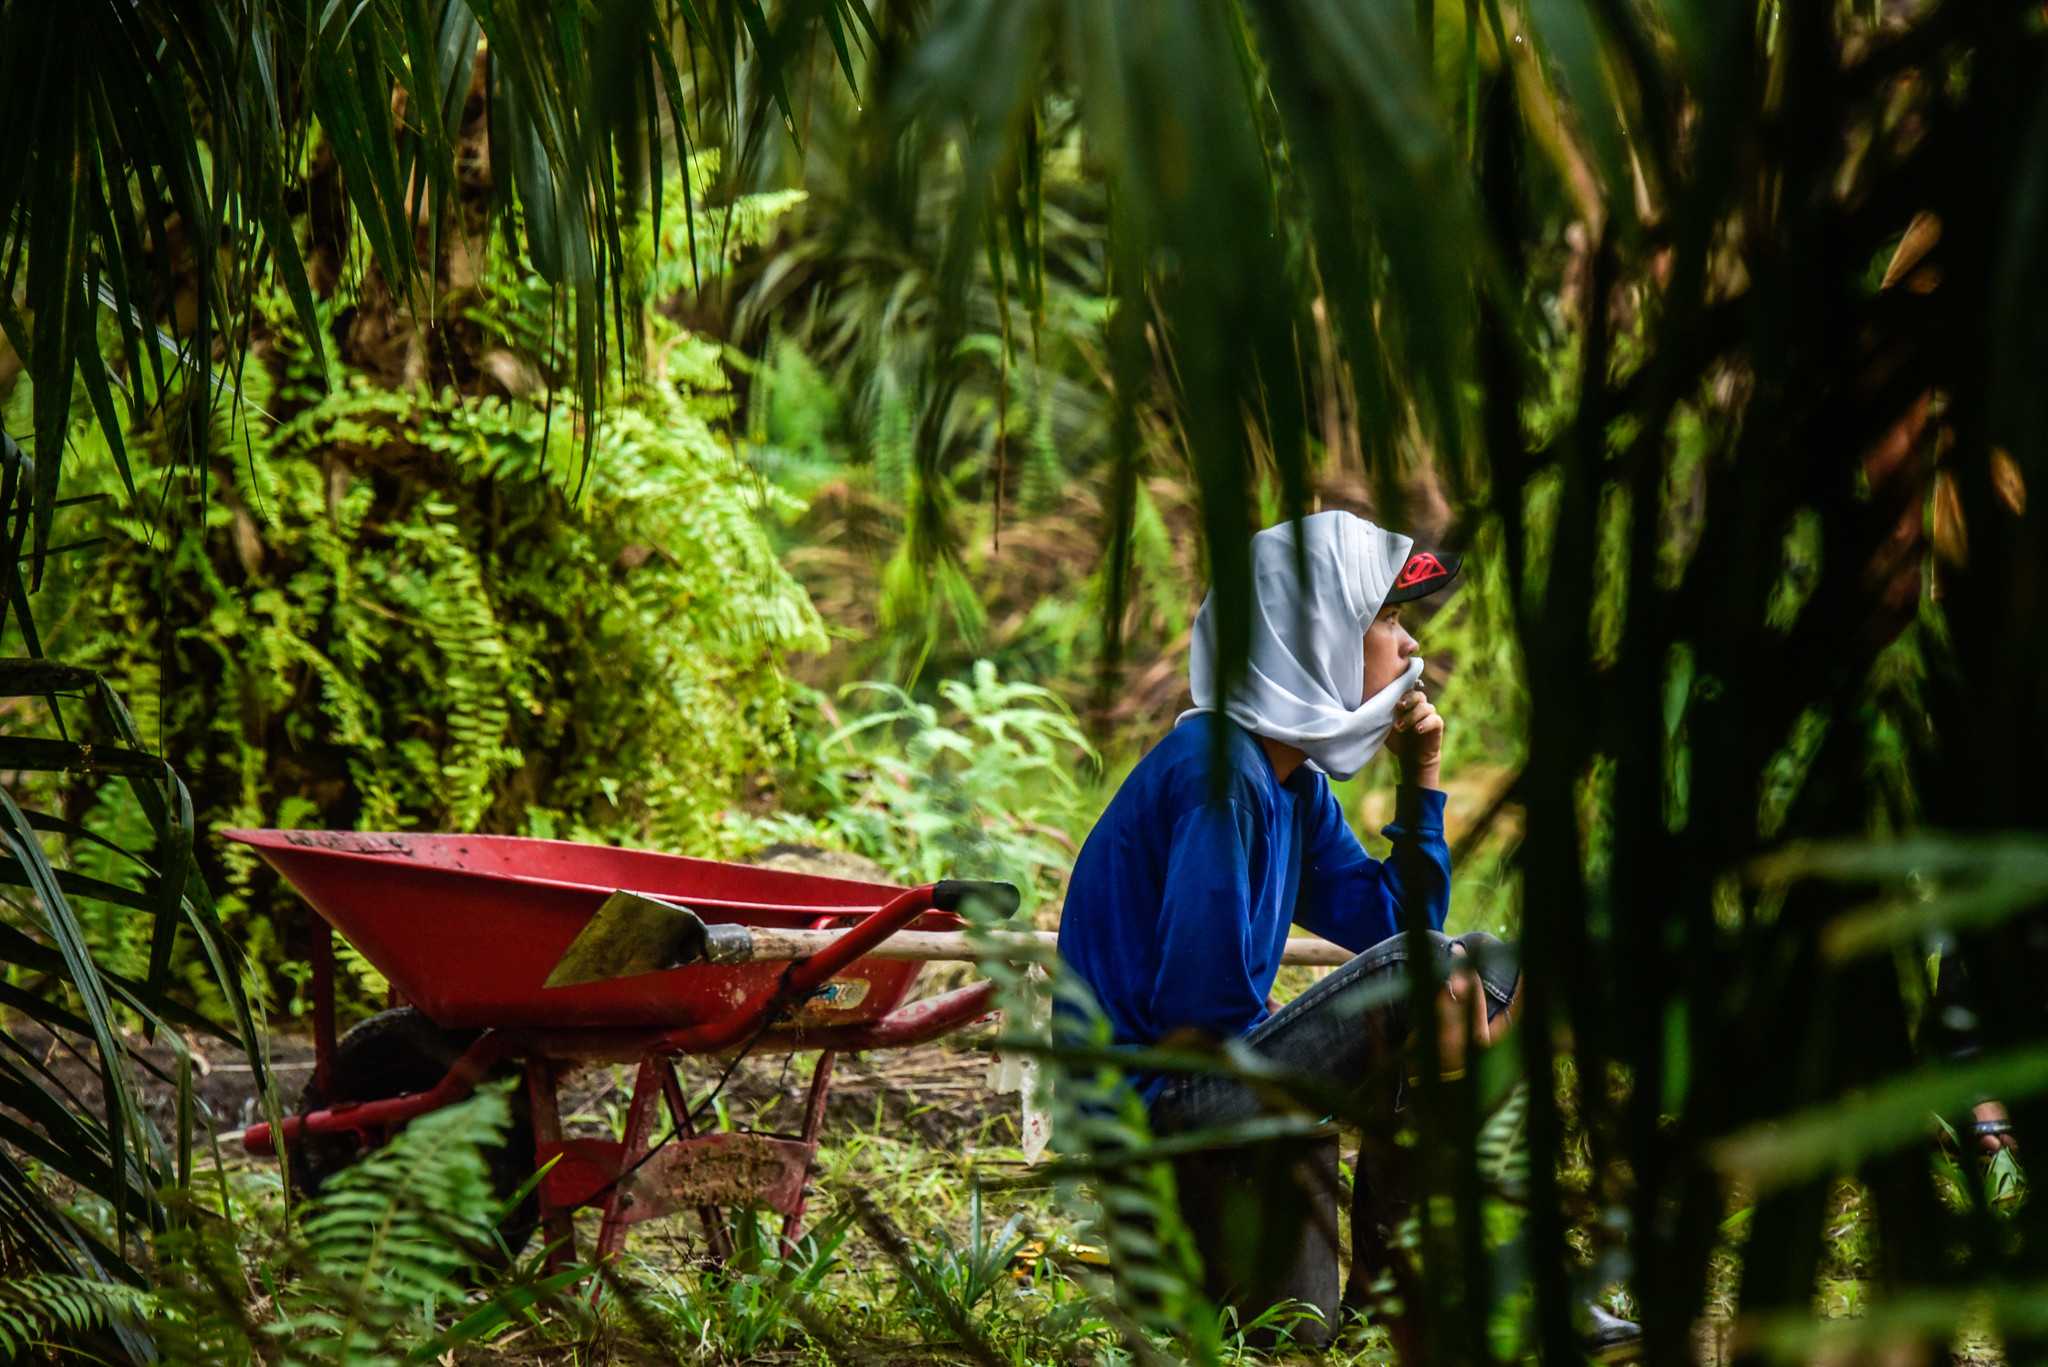 A woman waiting to begin harvesting oil palm in Kapuas Hulu, West Kalimantan. Photo: Icaro Cooke Vieira/CIFOR, CC BY-NC-ND 2.0